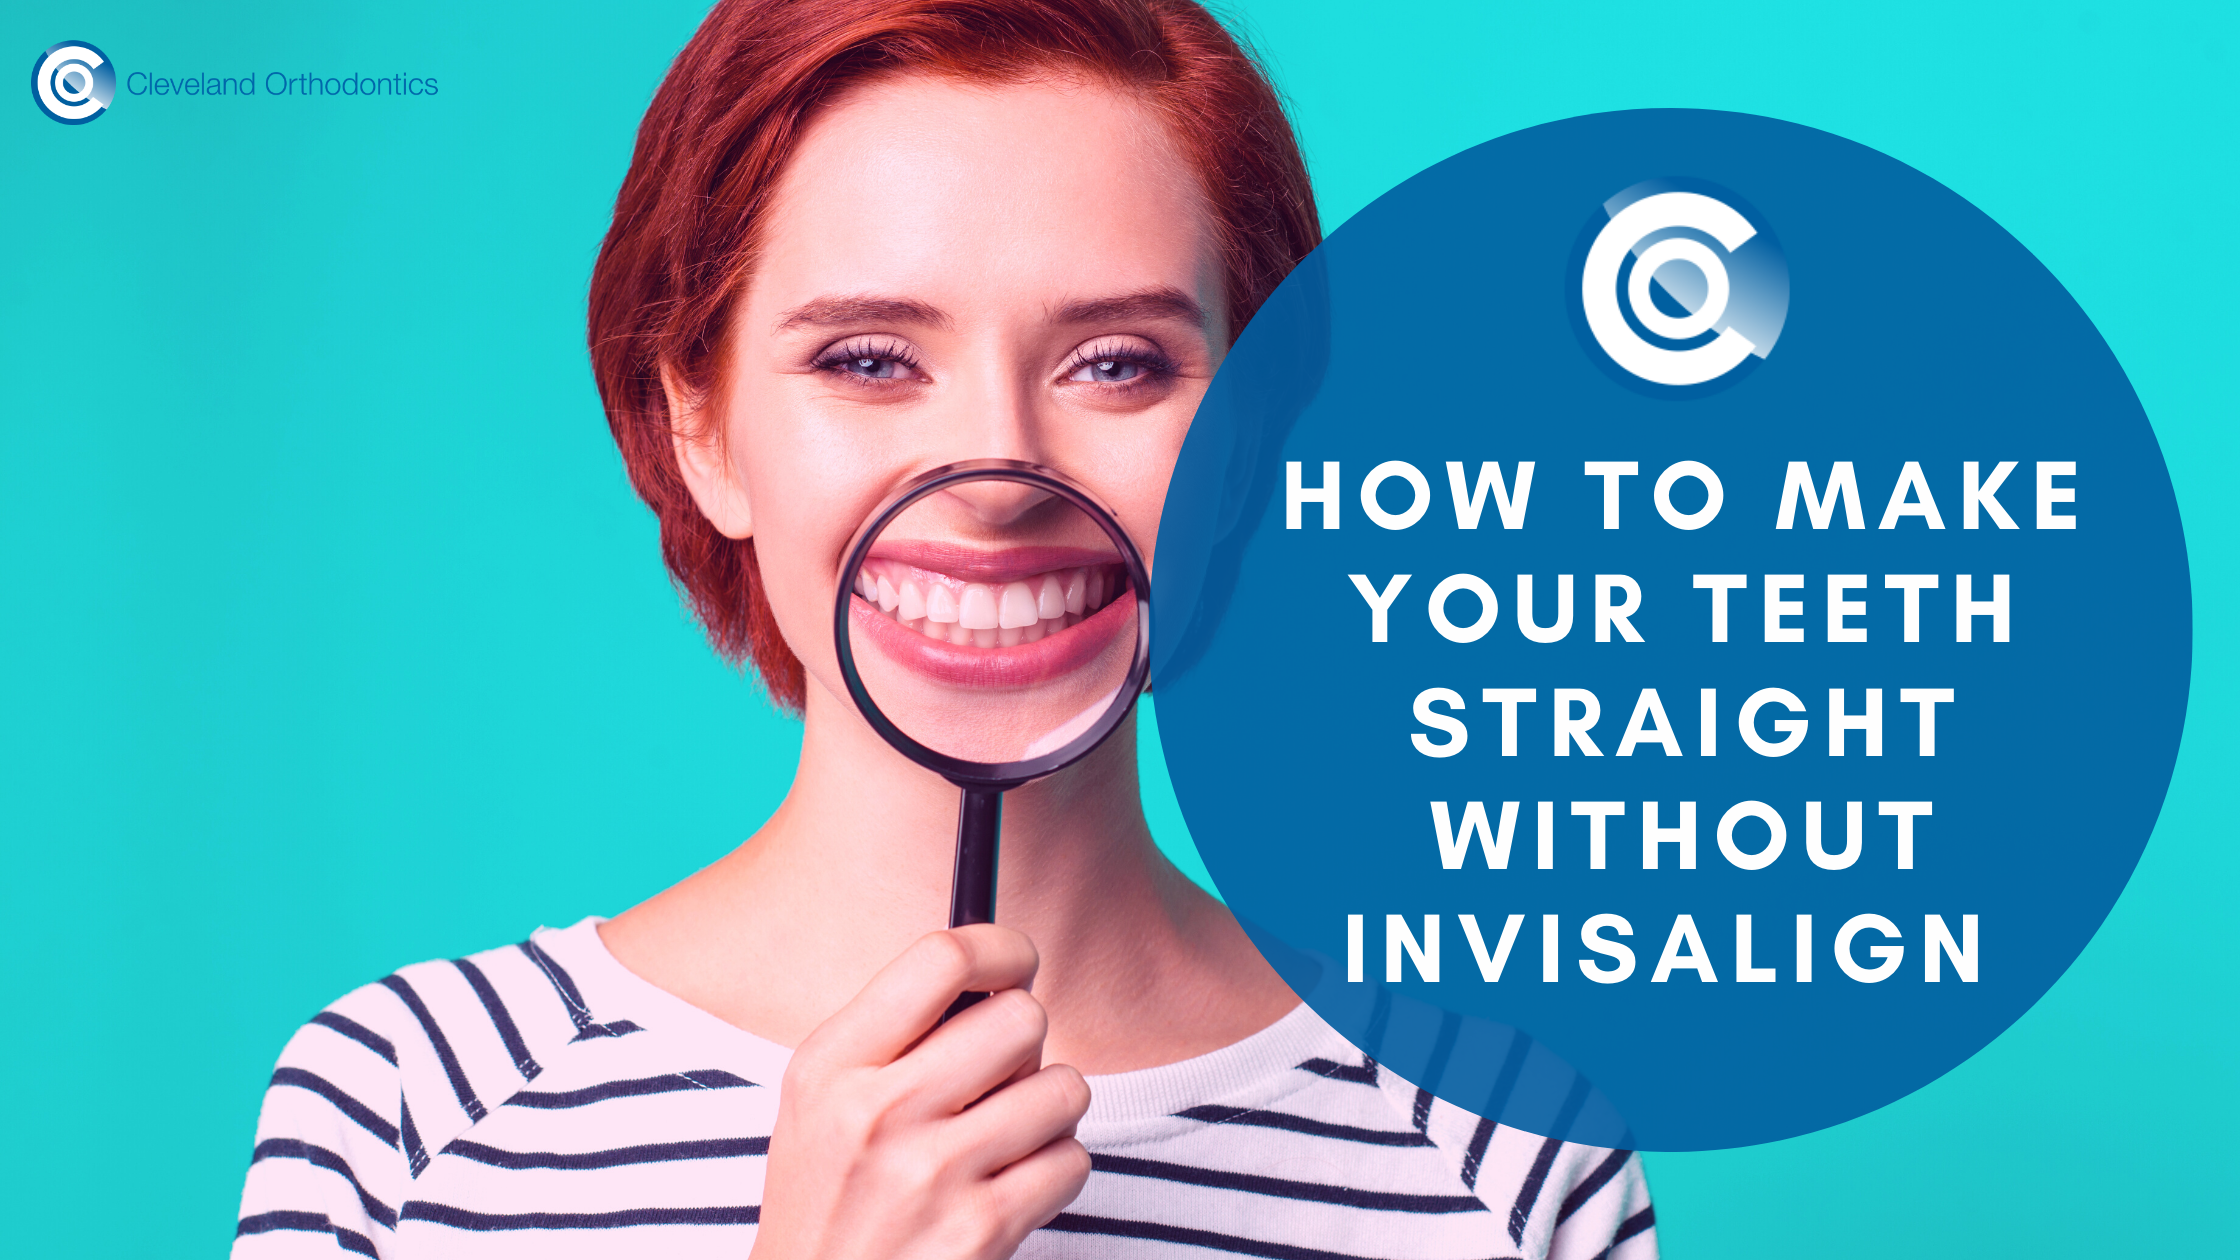 How To Make Your Teeth Straight Without Invisalign - Cleveland Orthodontics  in Middlesbrough